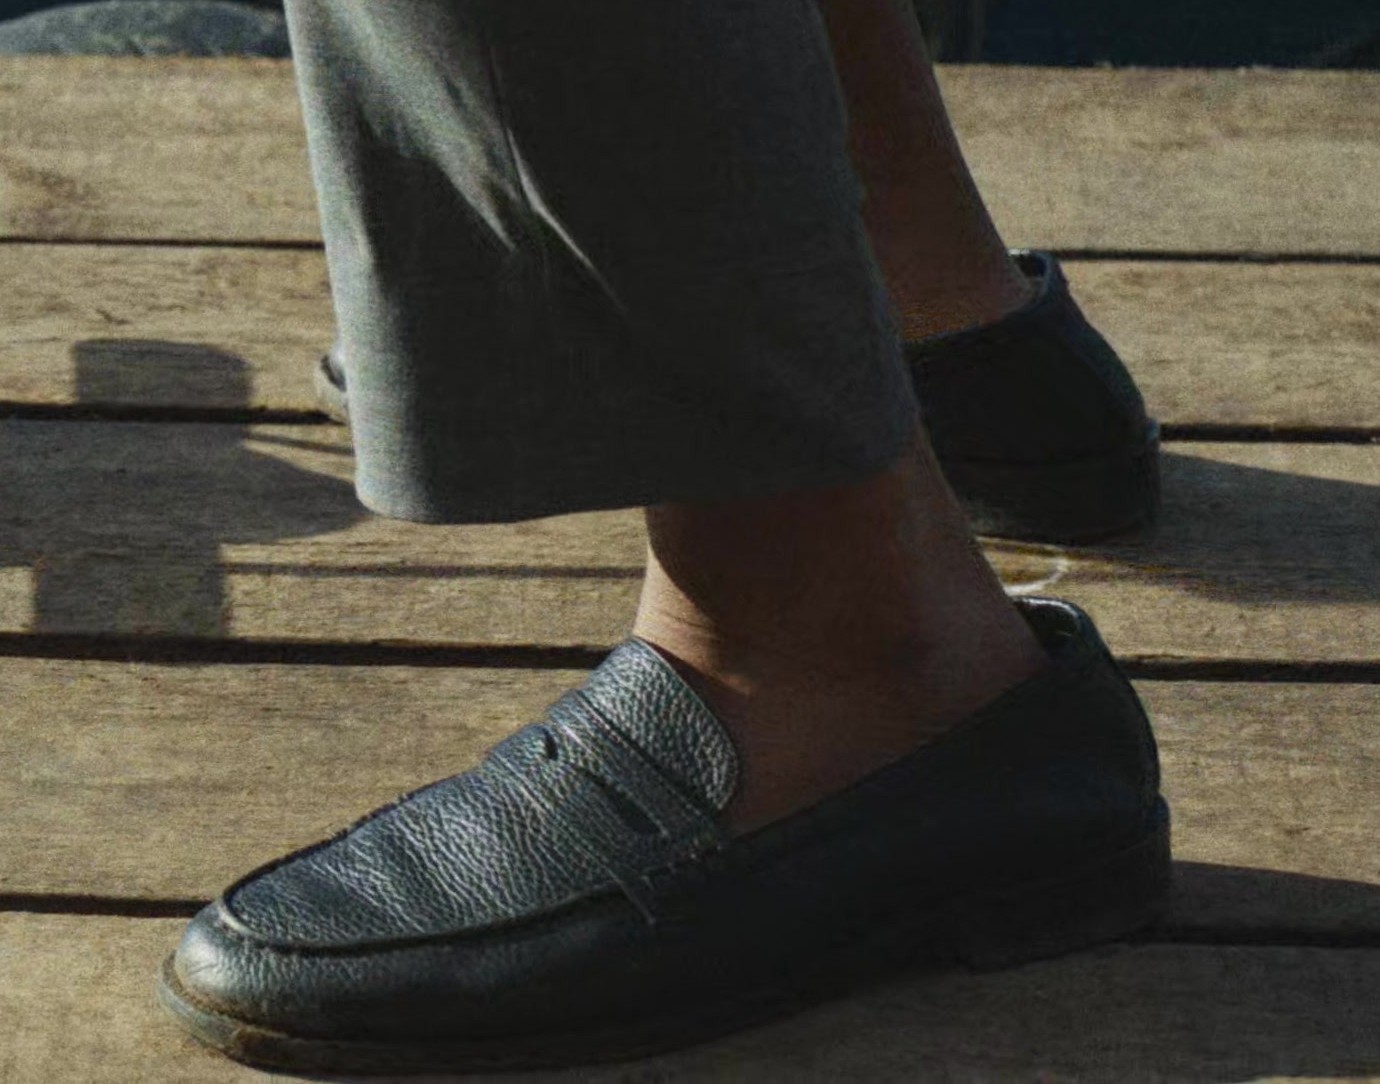 Worn on Mr. & Mrs. Smith TV Show - Black Leather Slip-On Loafers Worn by Donald Glover as John Smith